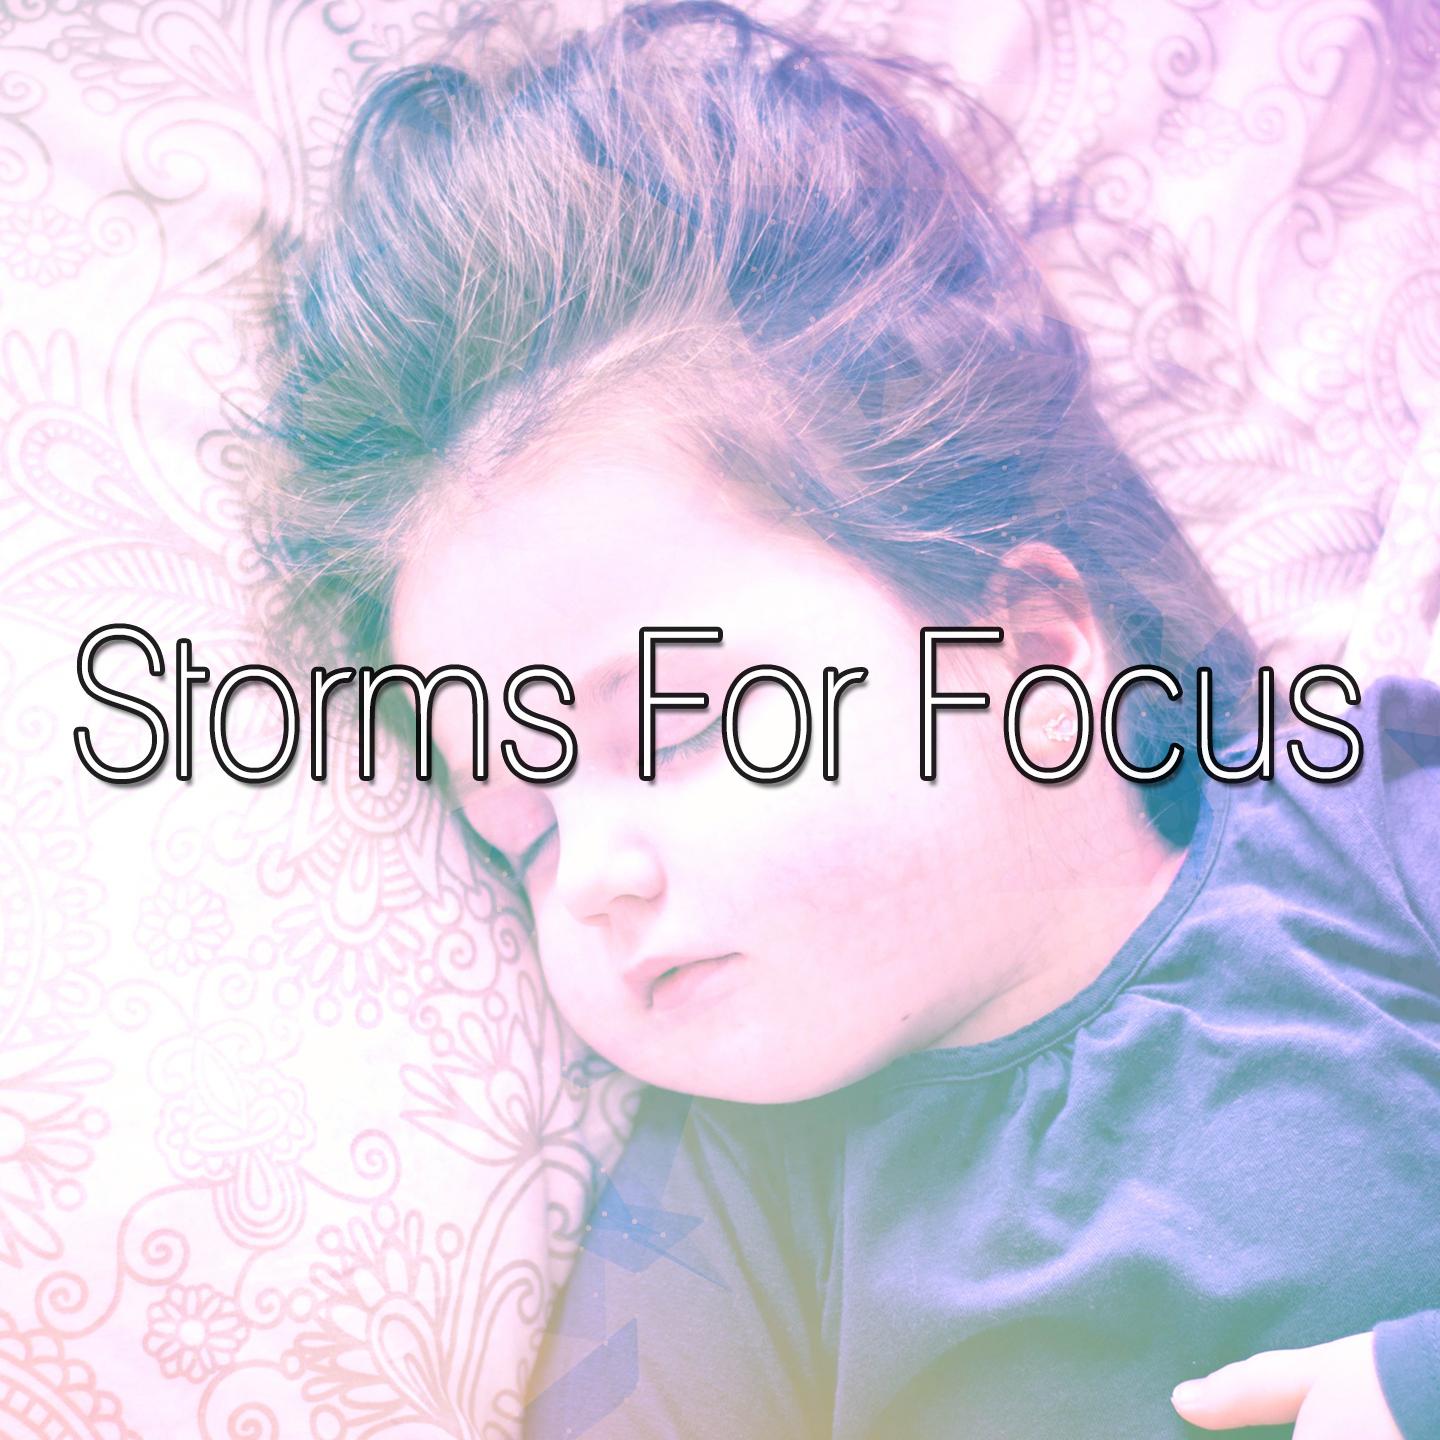 Storms For Focus